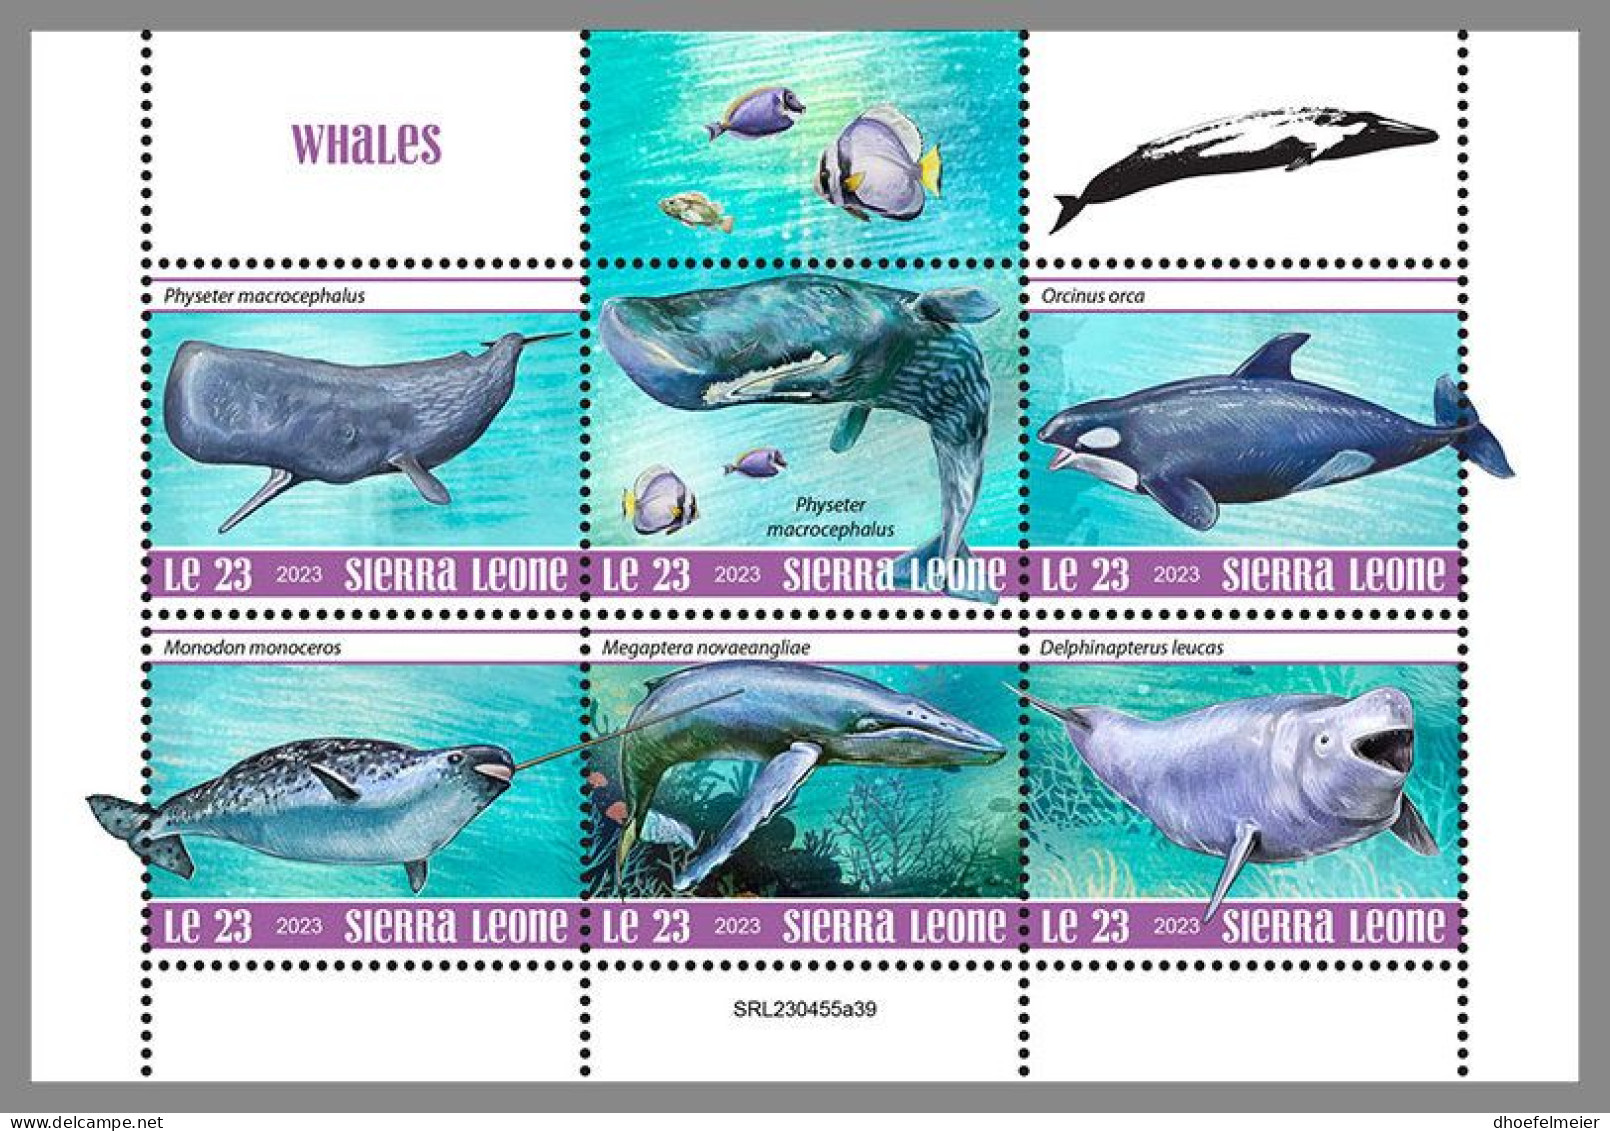 SIERRA LEONE 2023 MNH Whales Wale M/S – OFFICIAL ISSUE – DHQ2413 - Ballenas